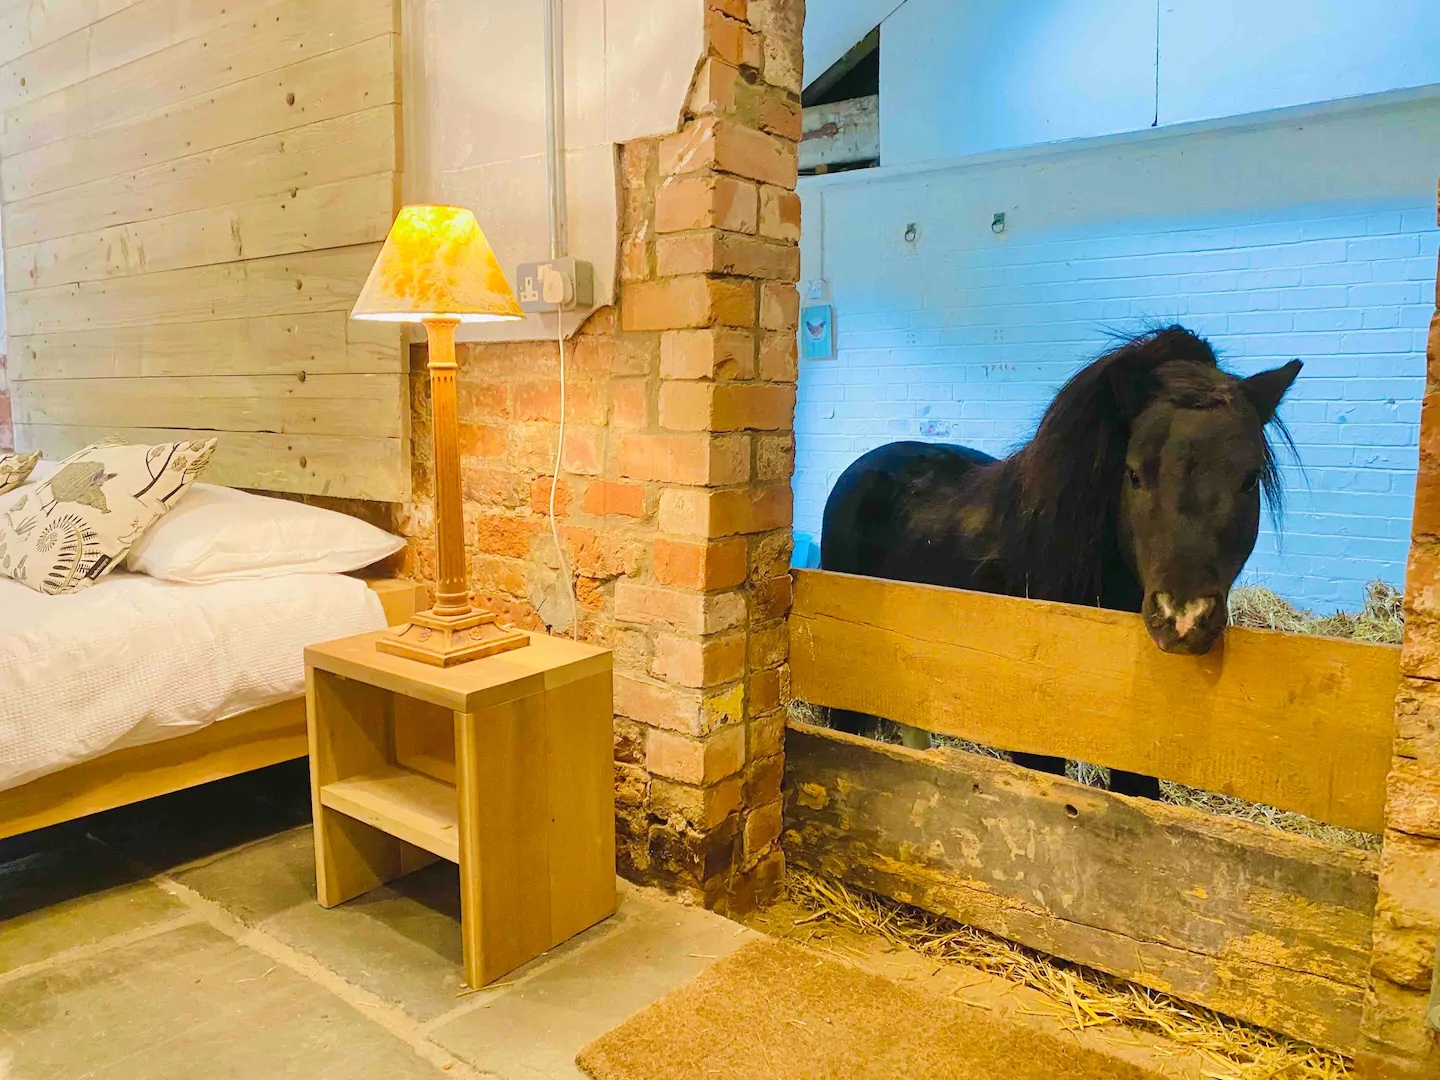 inside the unique Stay in in Thurgarton, Nottinghamshire, with the Miniature Shetland Pony, available online for renting on Airbnb.